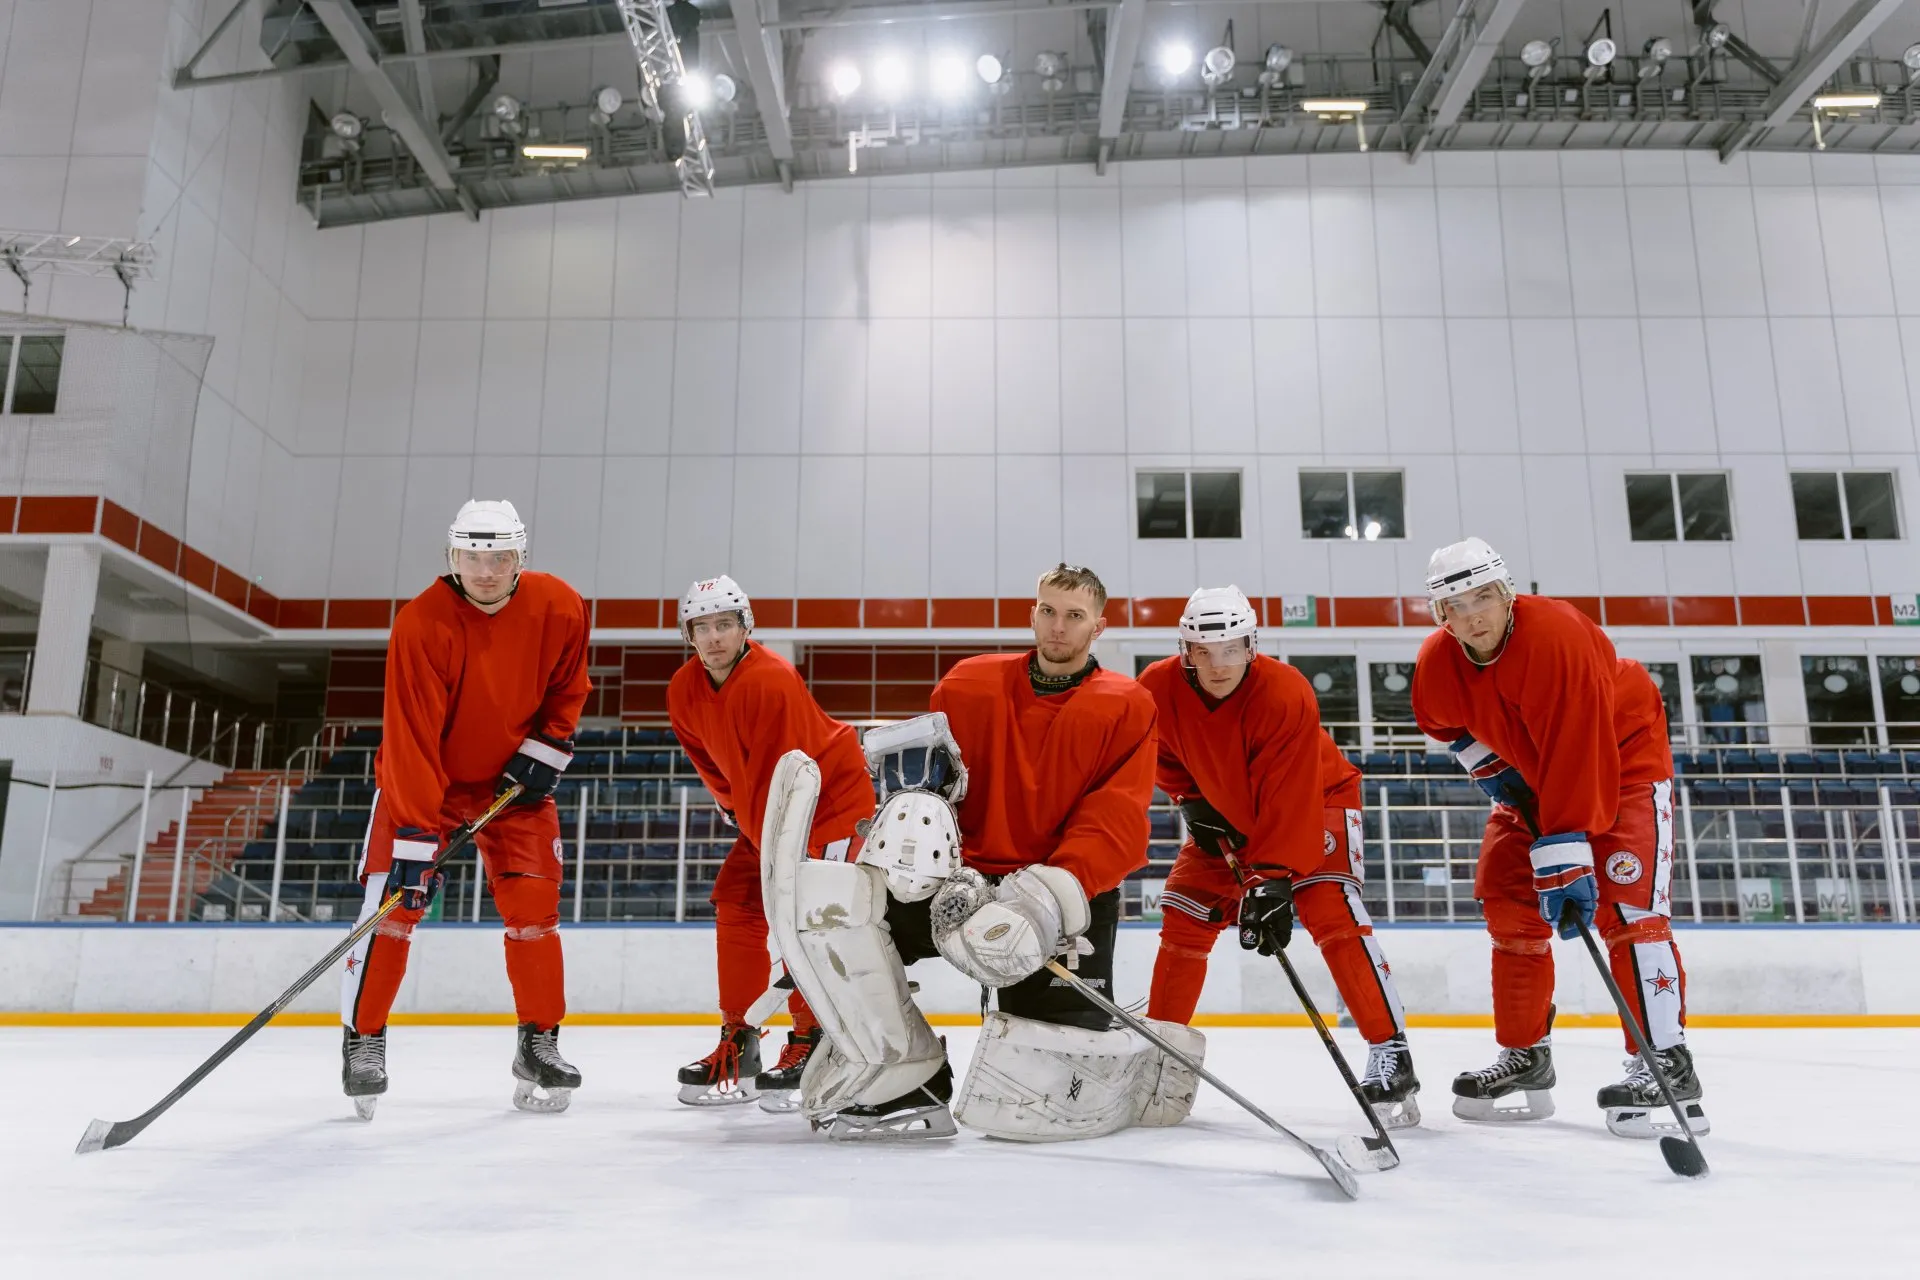 Four ways hockey players can benefit from receiving chiropractic care